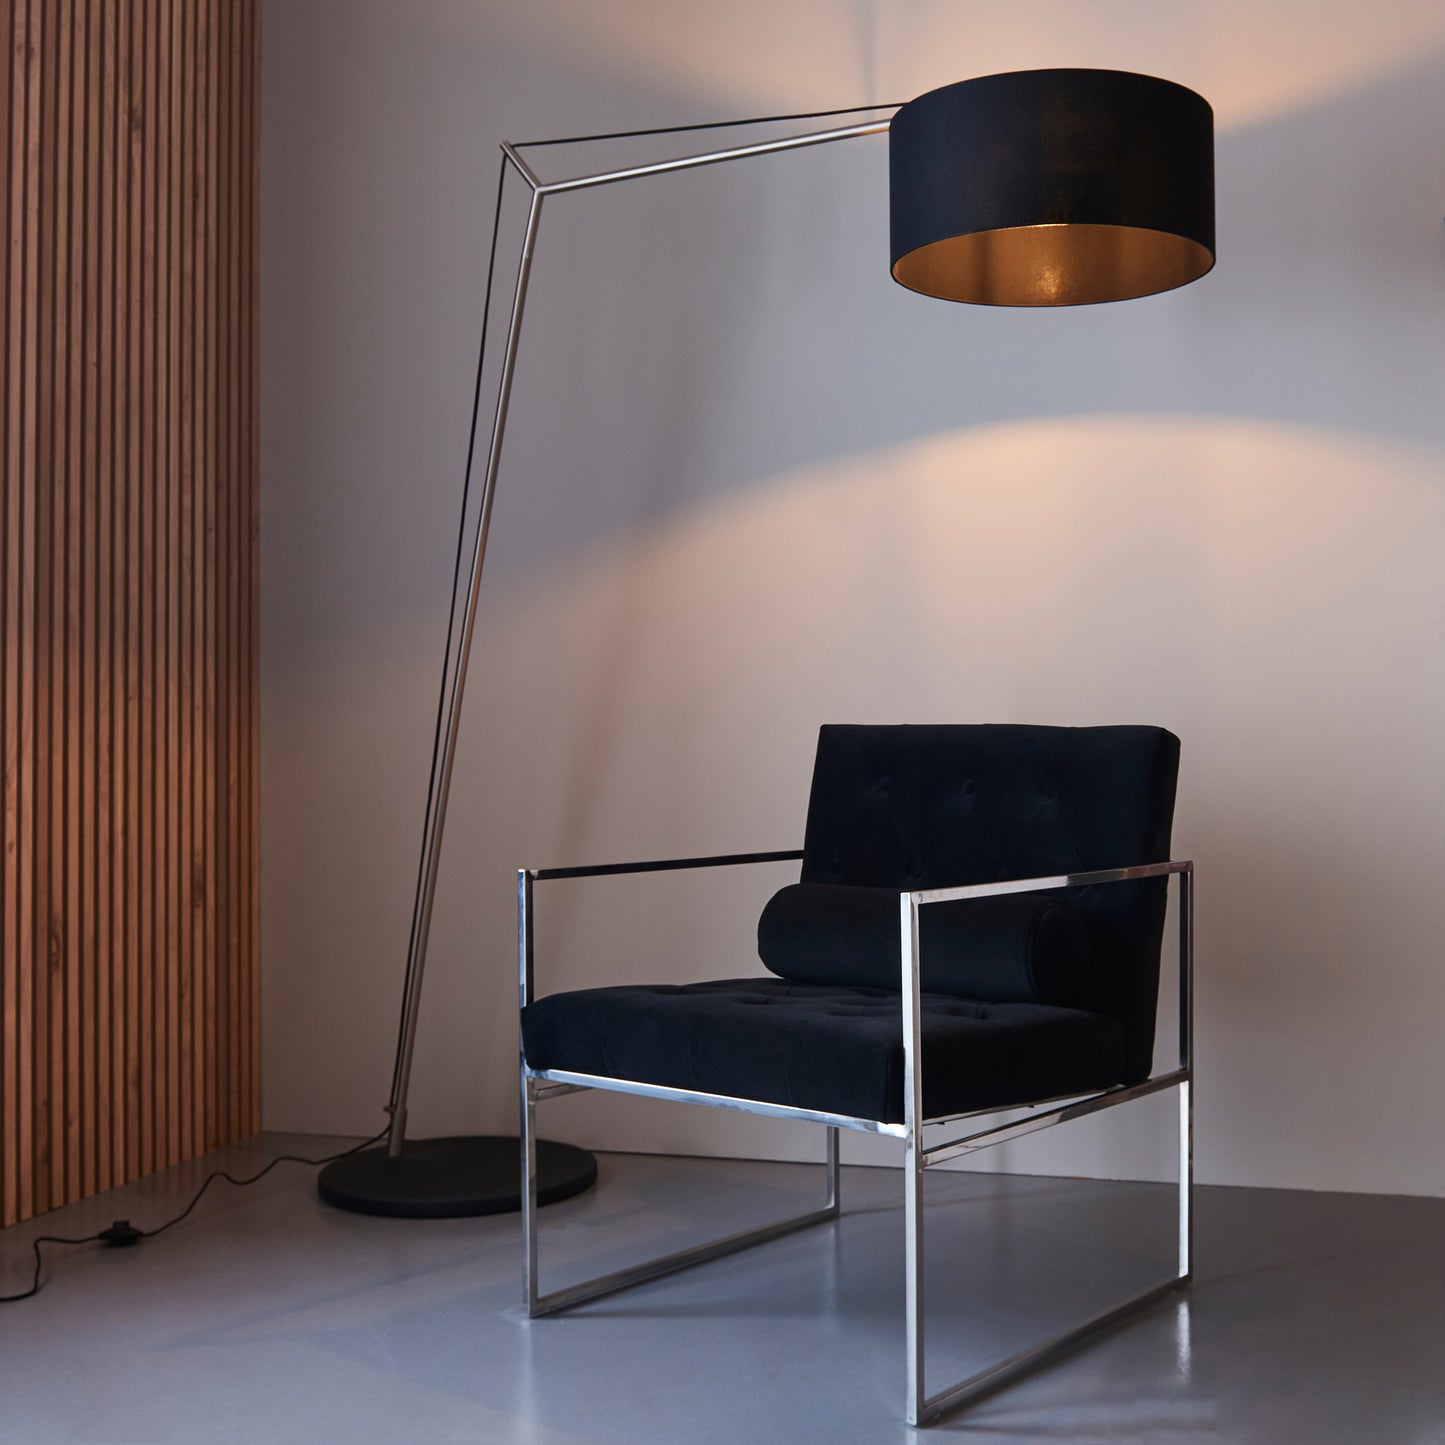 A black chair paired with a Kikiathome.co.uk Buckland Floor Lamp Antique Nickel enhances interior decor.